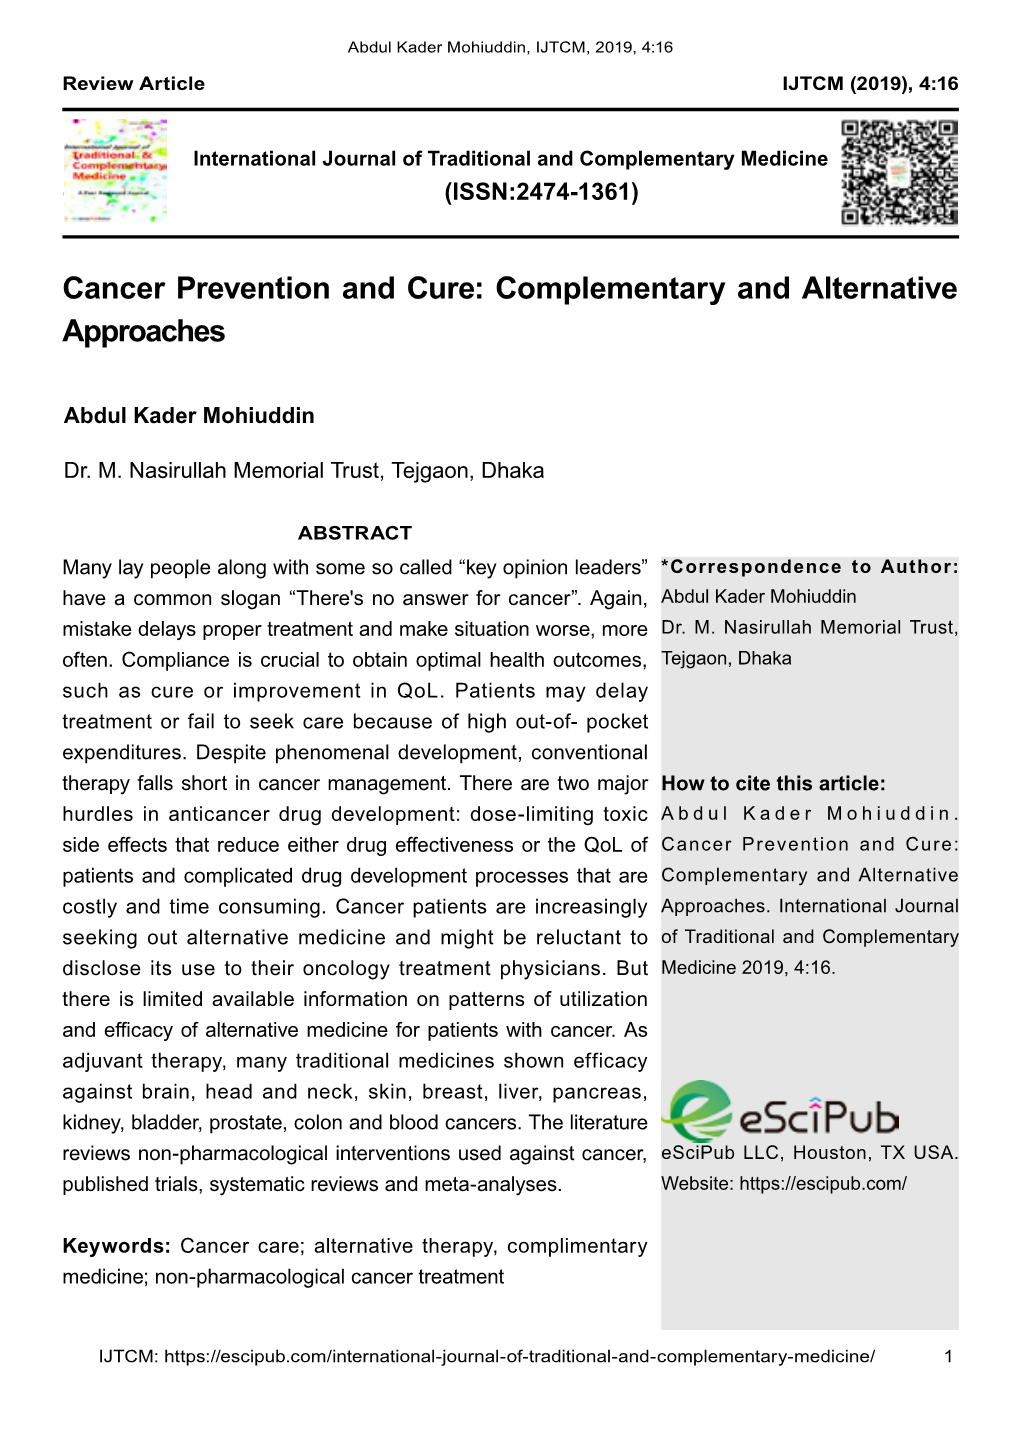 Cancer Prevention and Cure: Complementary and Alternative Approaches